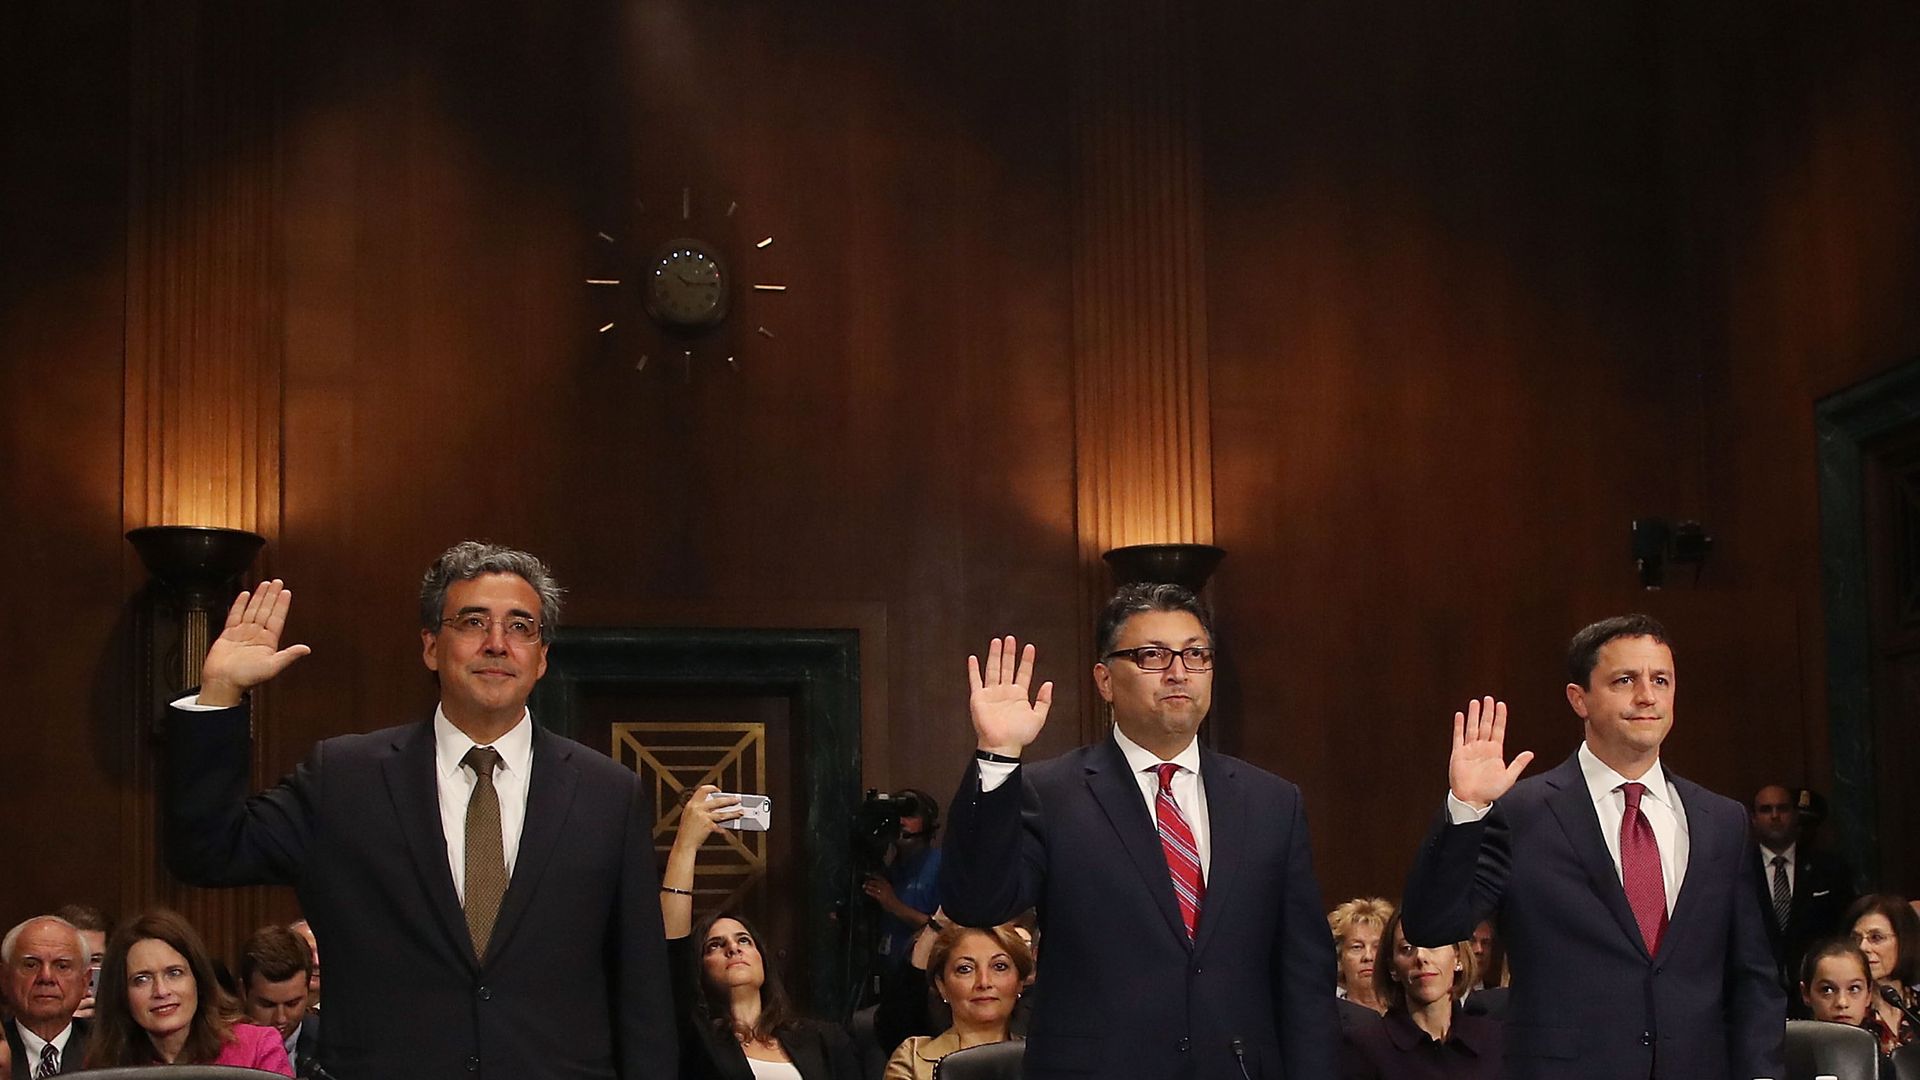 Three men, with Makan Delrahim at the center, raise their right hands before testifying in front of Congress